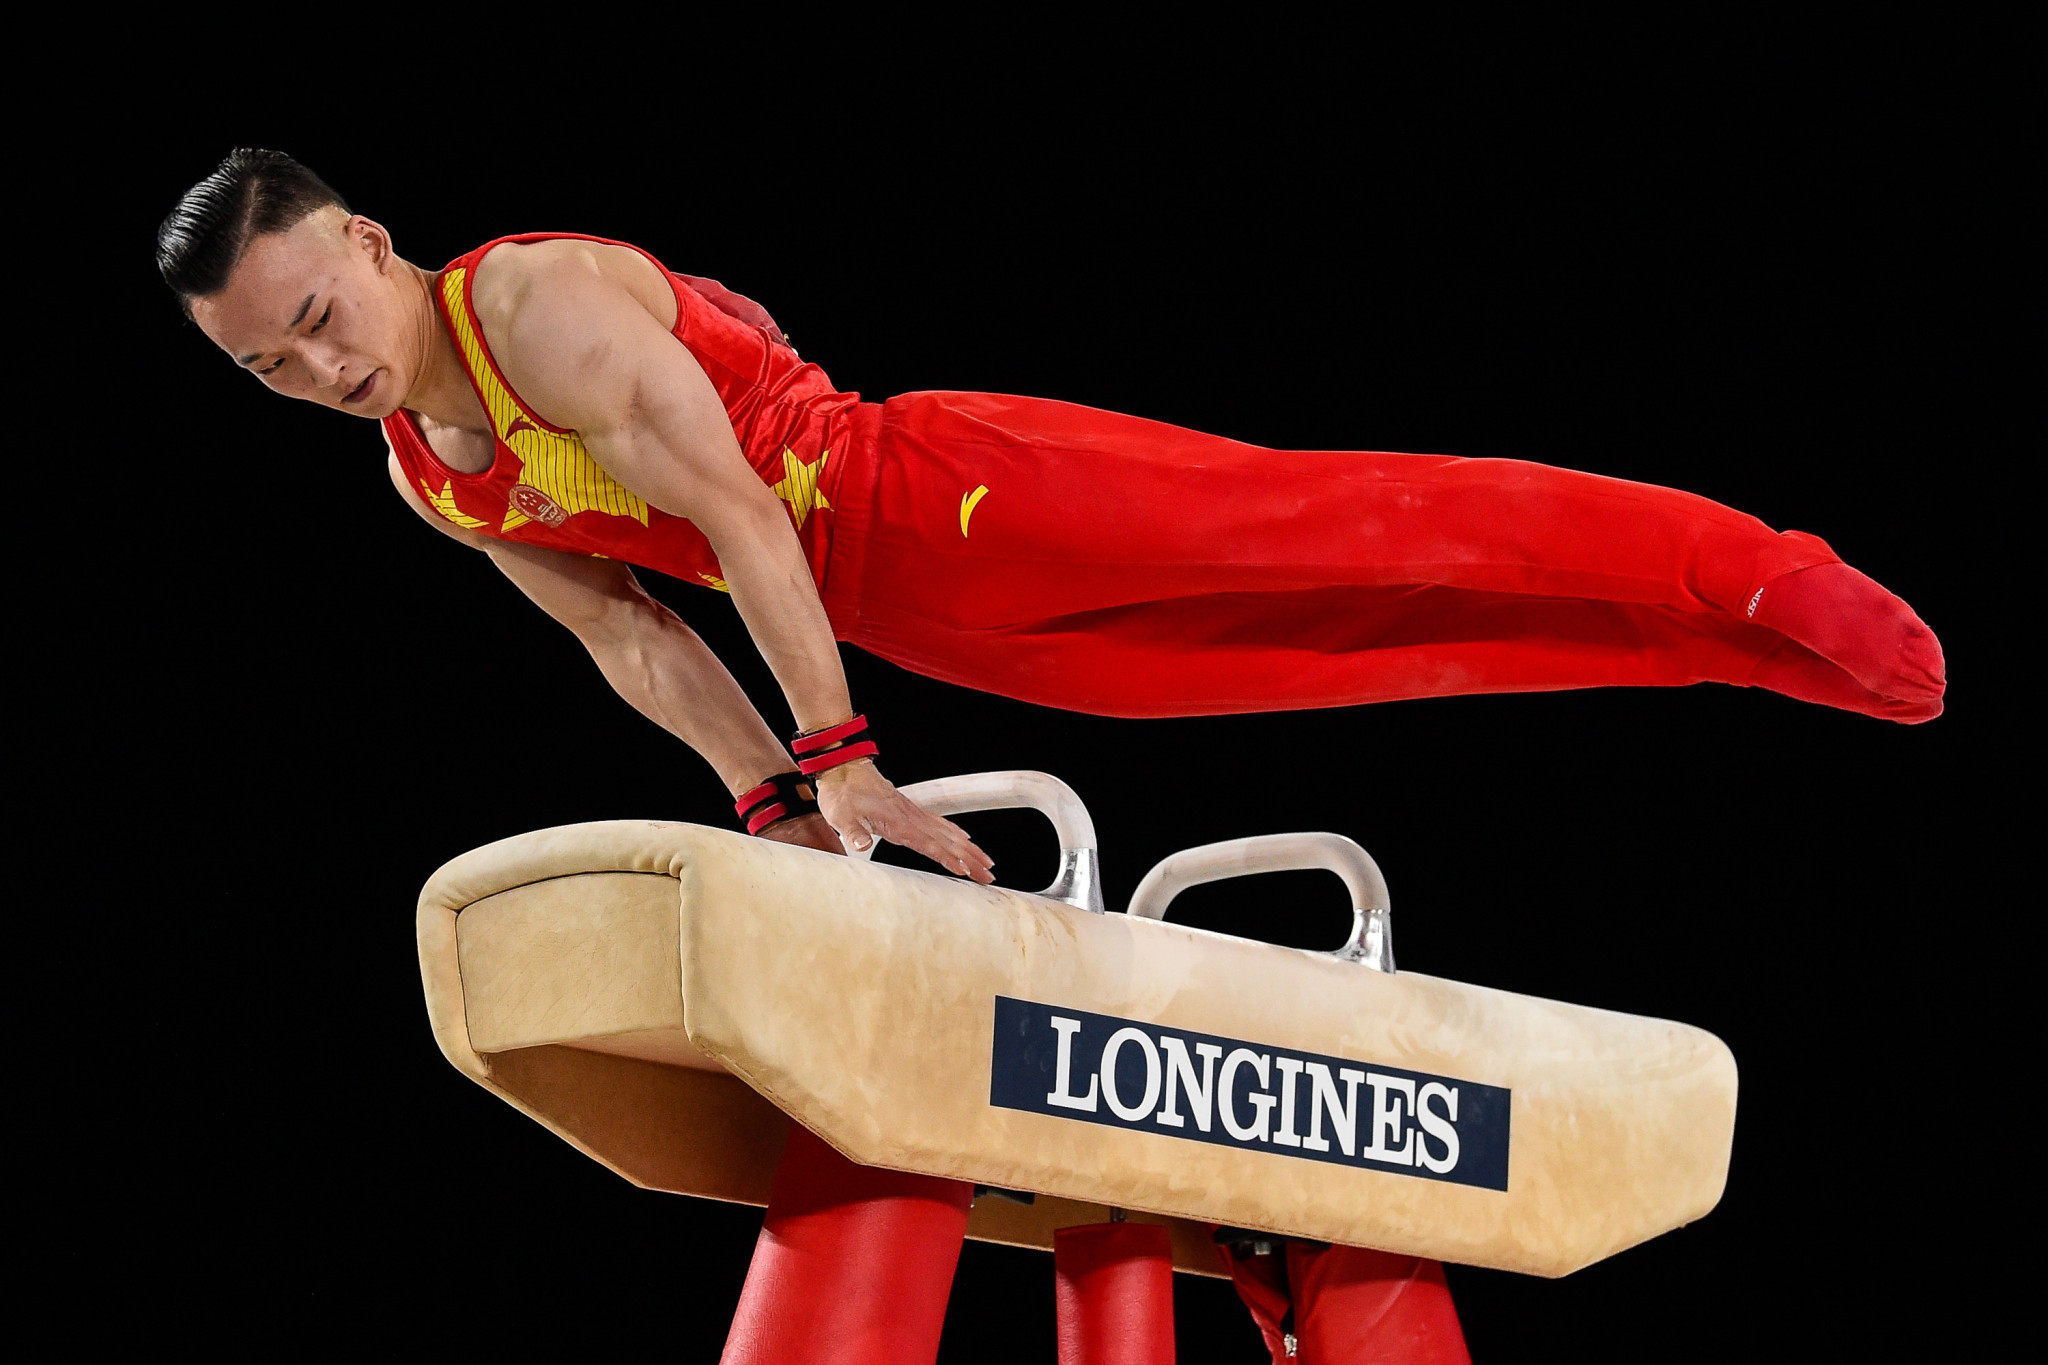 China's world all-around champion Xiao Ruoteng will also participate in Doha ©Getty Images